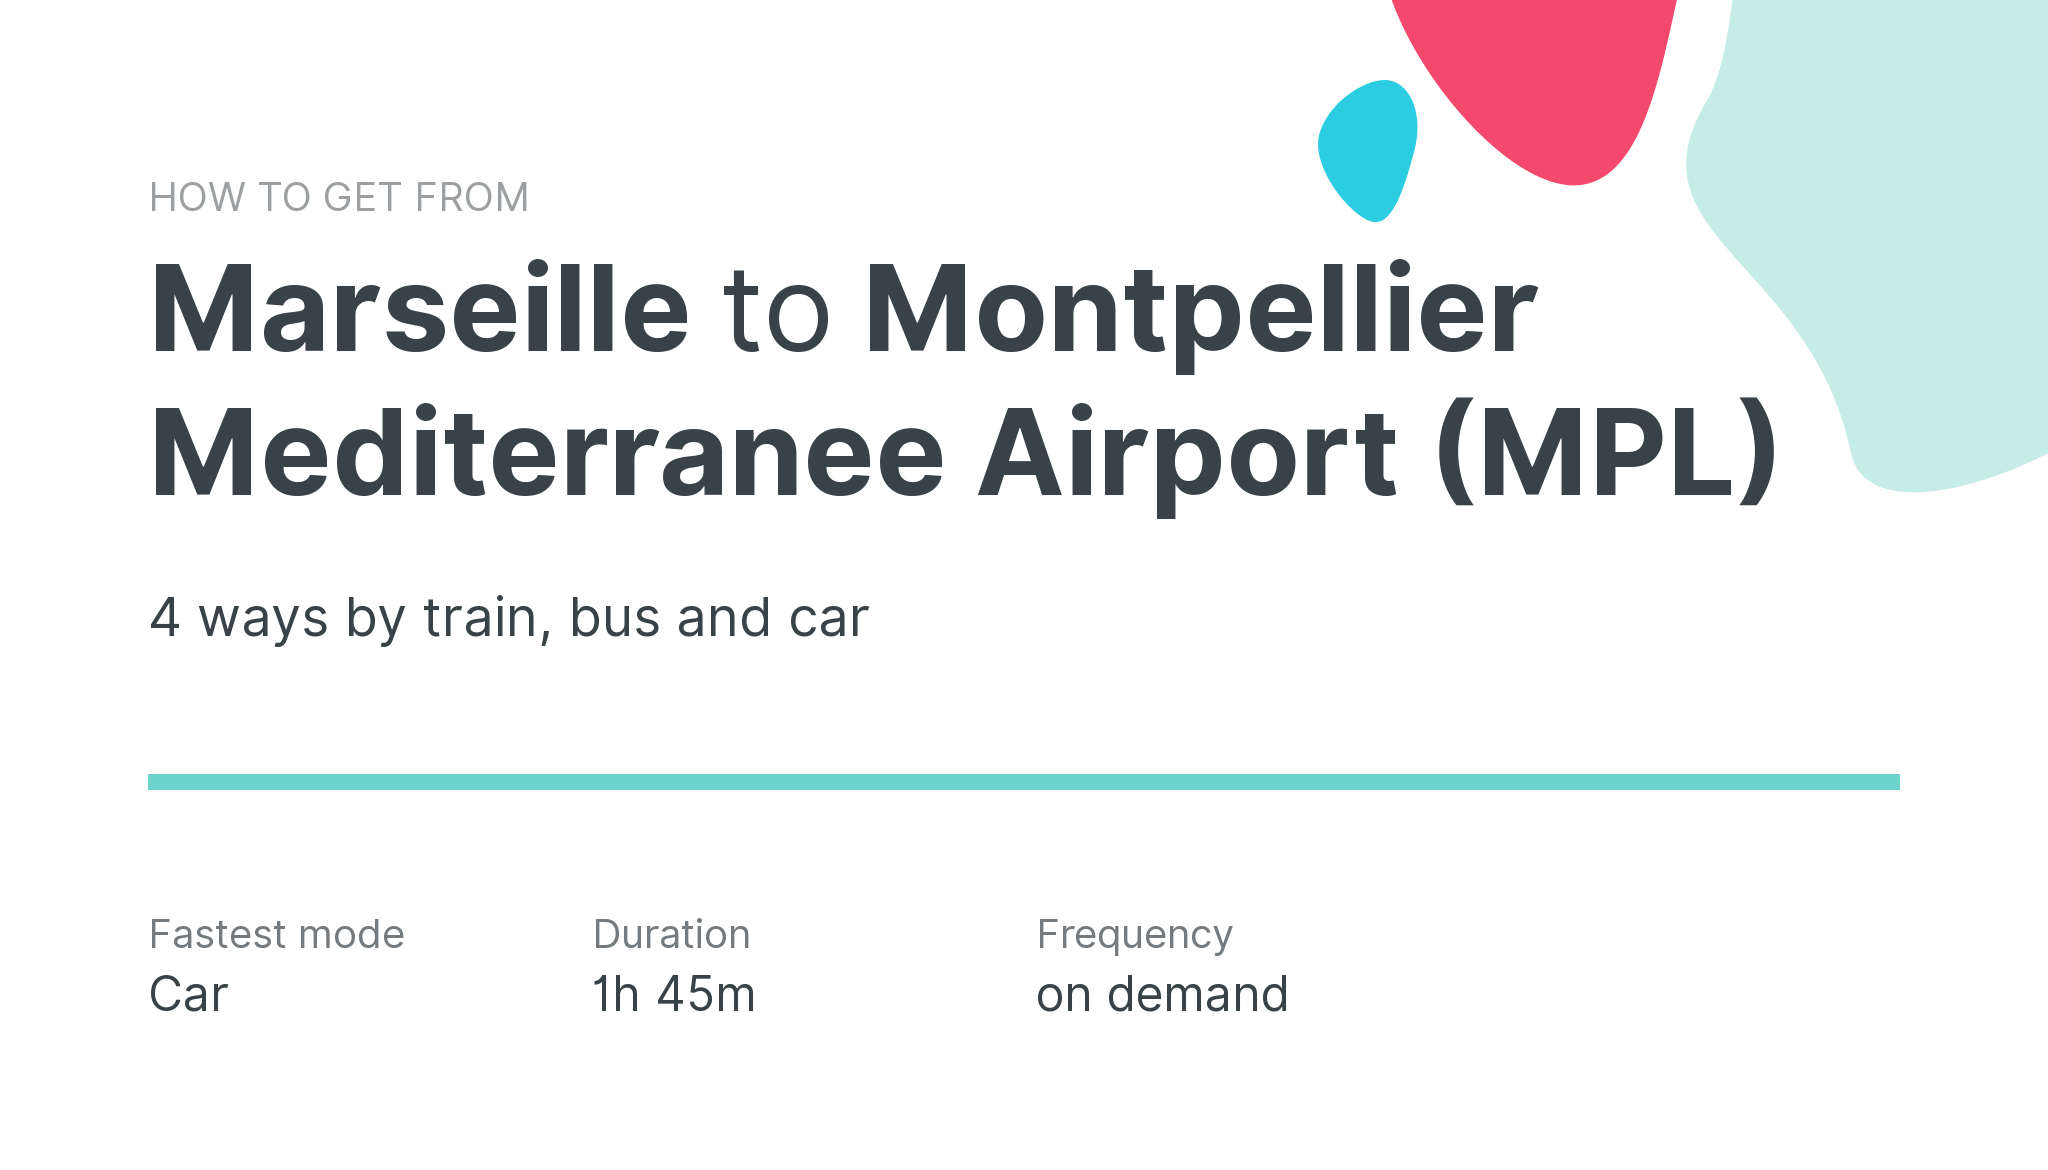 How do I get from Marseille to Montpellier Mediterranee Airport (MPL)